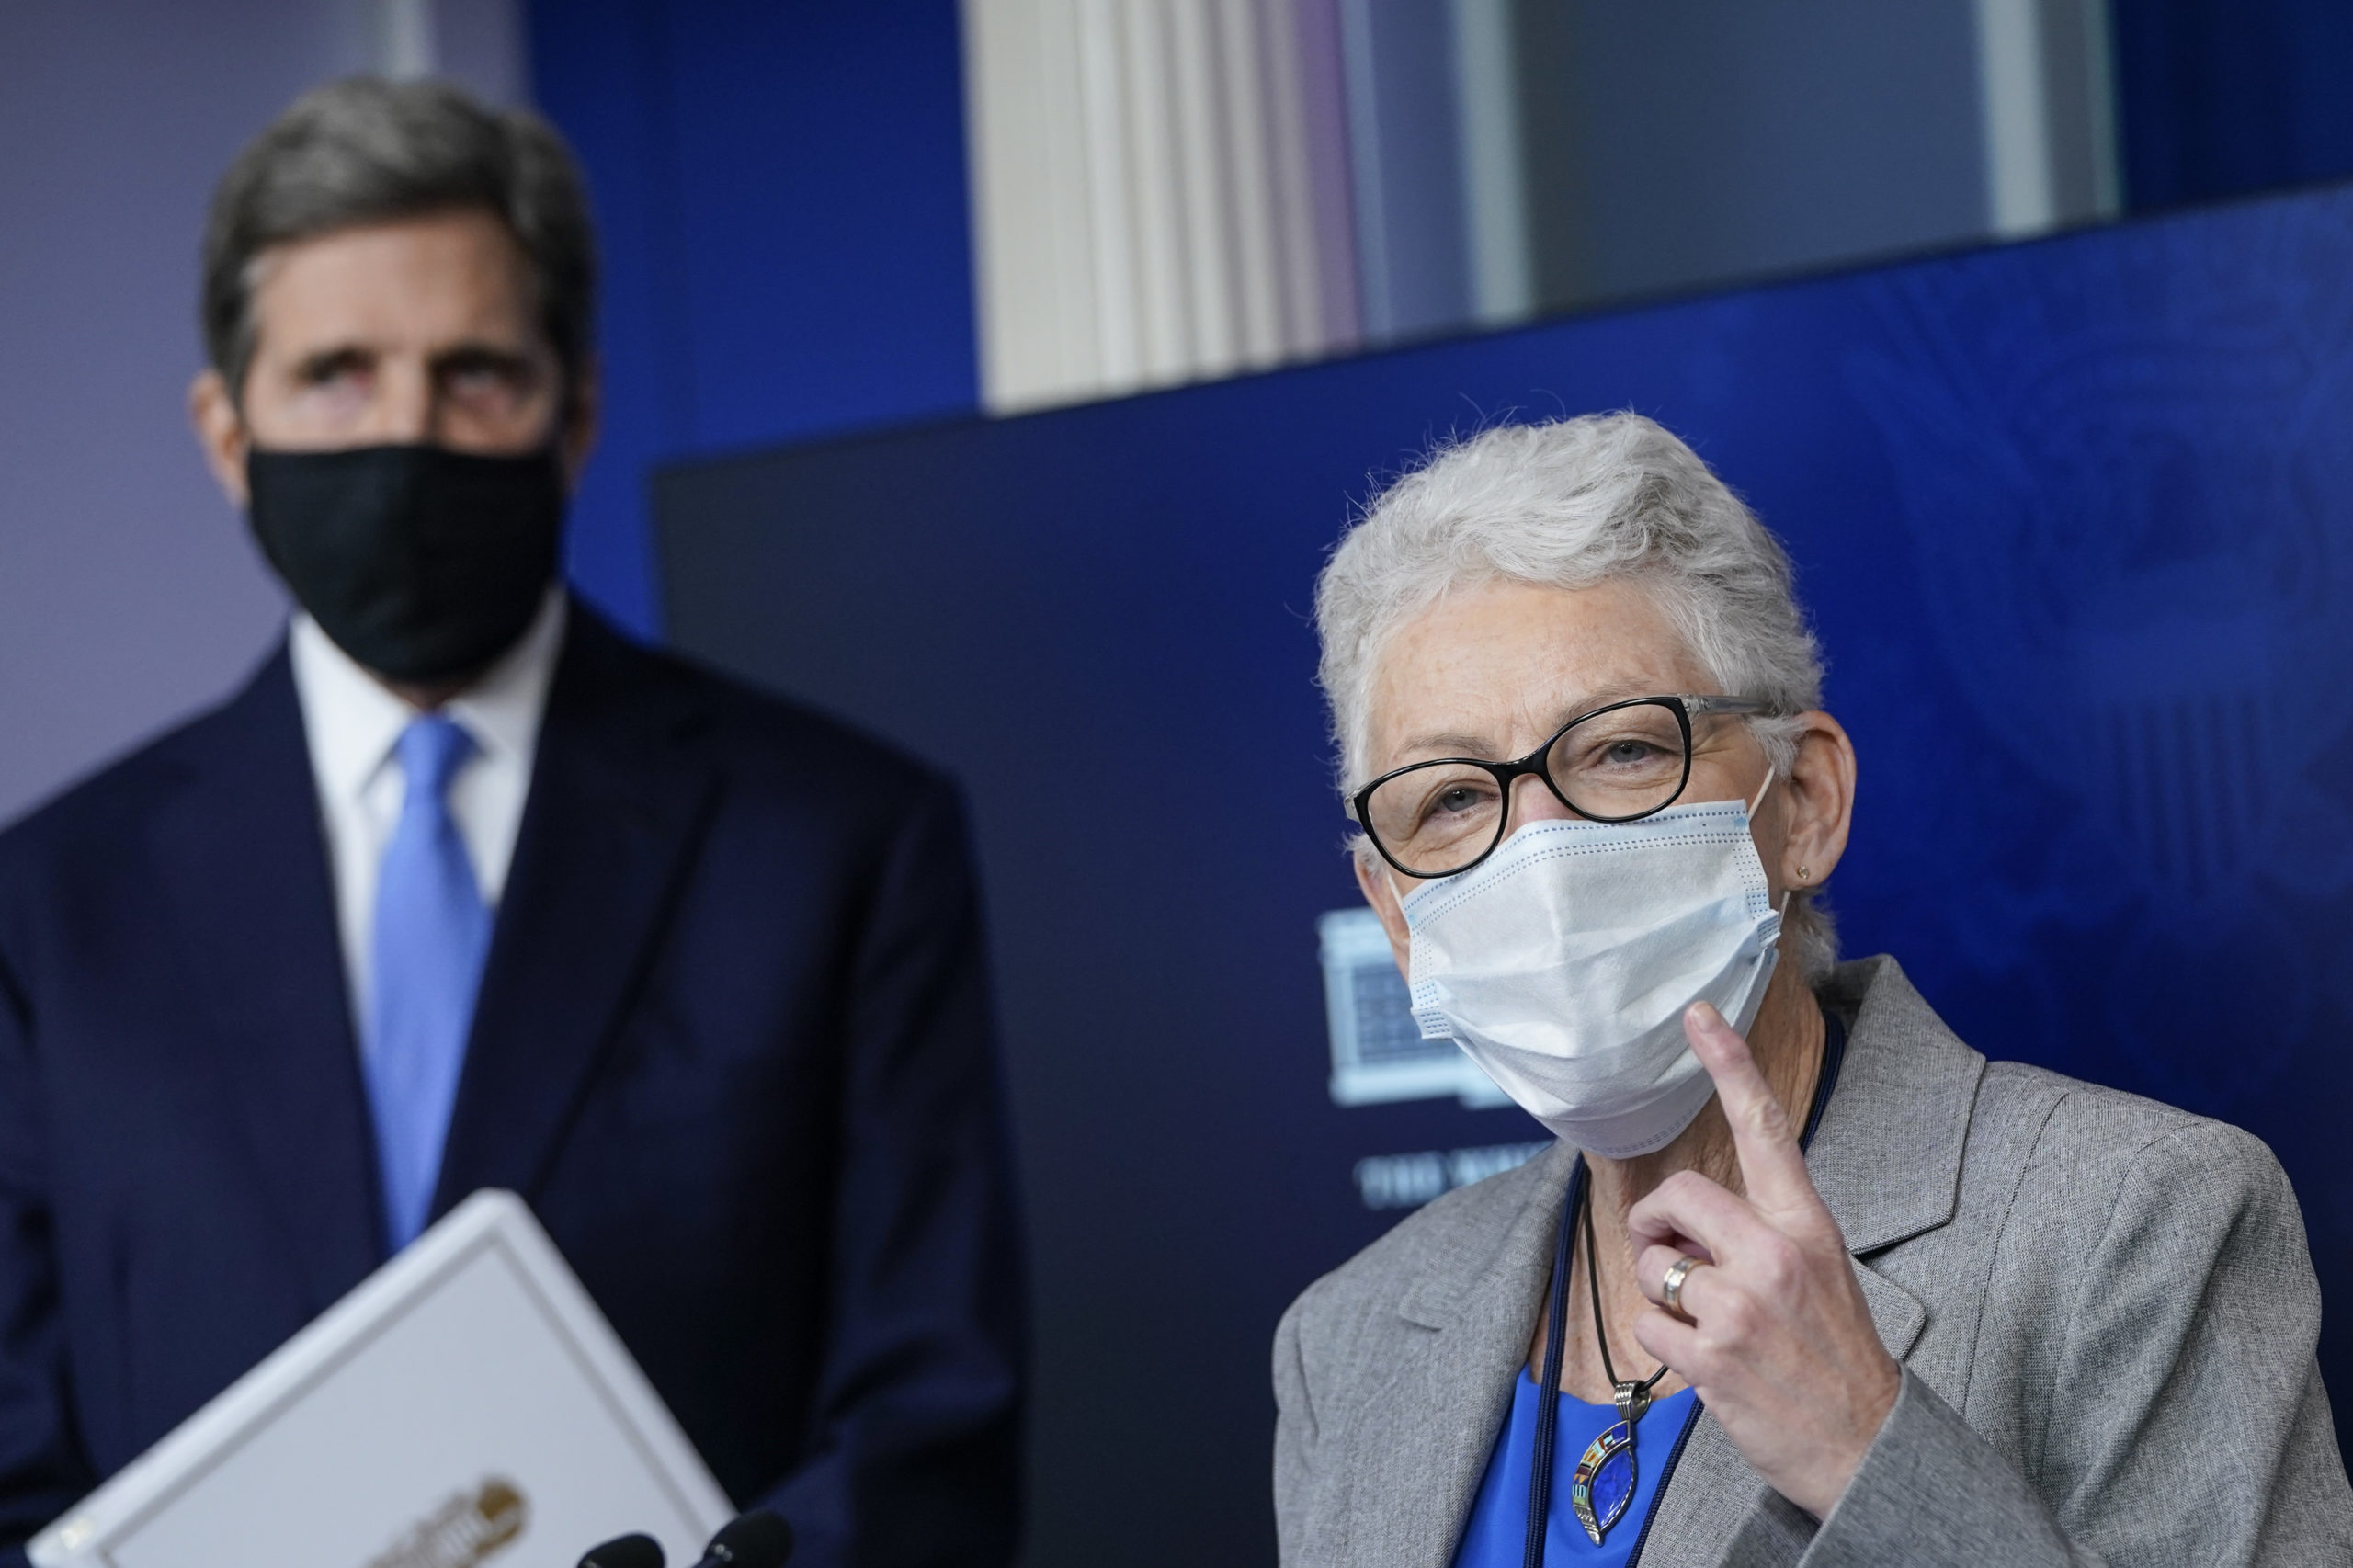 National Climate Advisor Gina McCarthy and Special Presidential Envoy for Climate John Kerry answer questions during a press briefing at the White House on Jan. 27, 2021. (Drew Angerer/Getty Images)